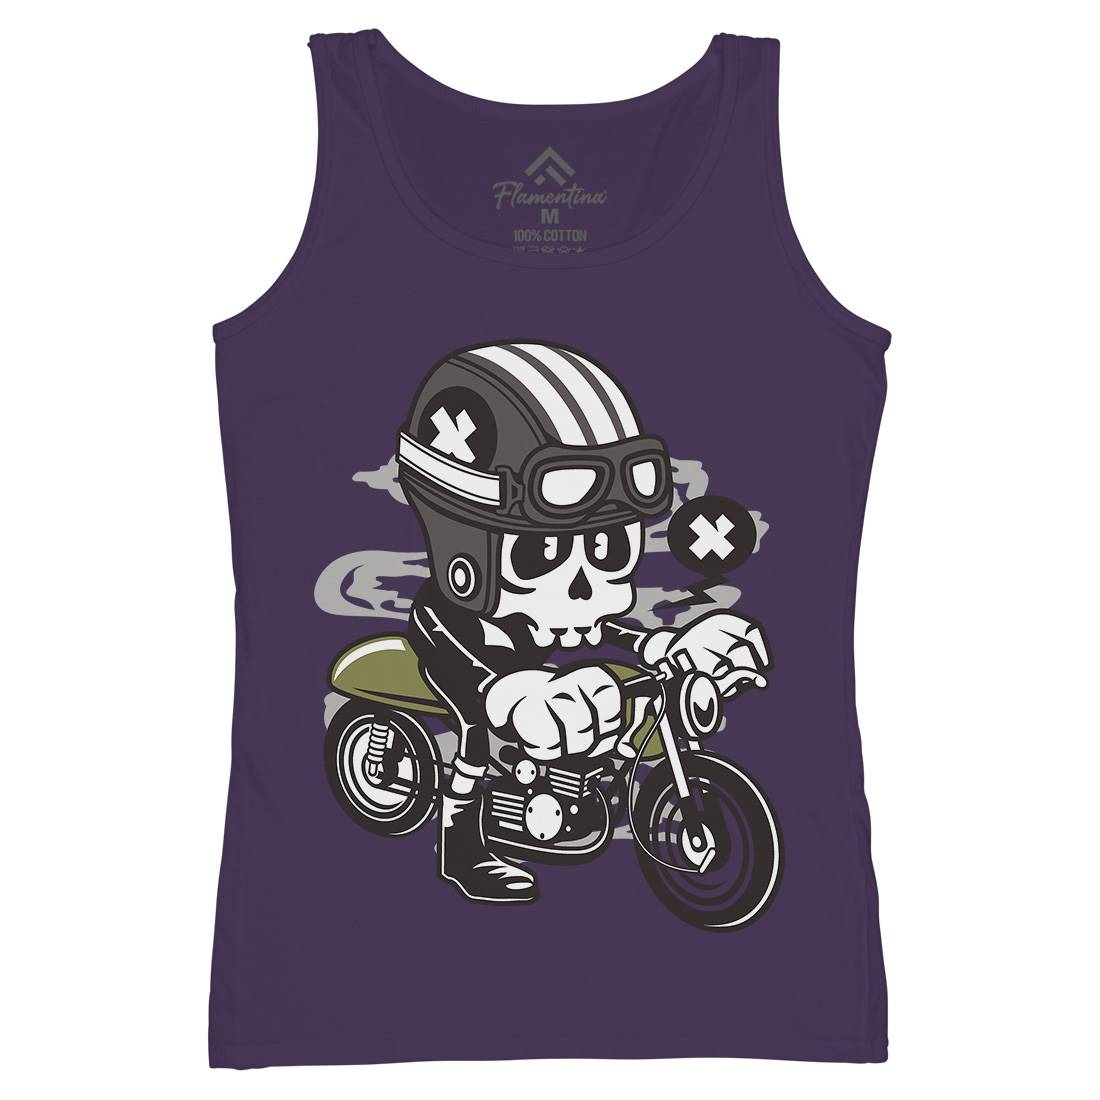 Caferacer Skull Womens Organic Tank Top Vest Motorcycles C039